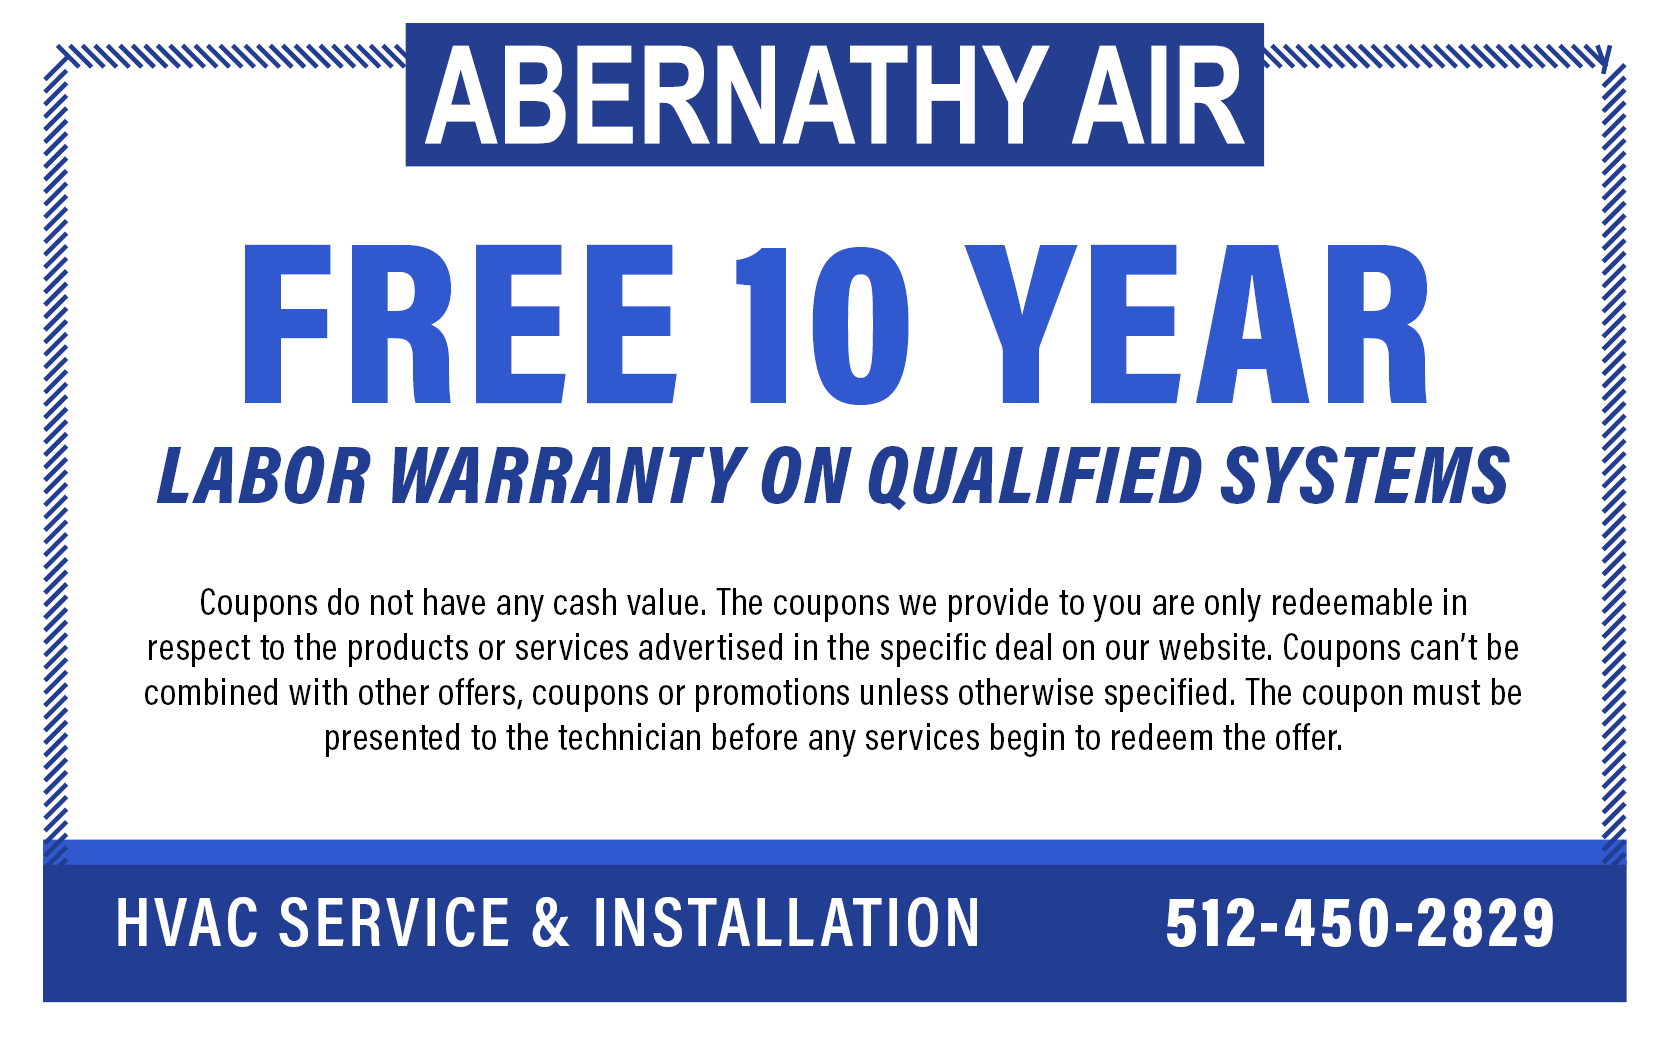 Abernathy Air - Maxwell AC and Heating Coupons - Free 10 Year Labor Warranty on Qualified Systems